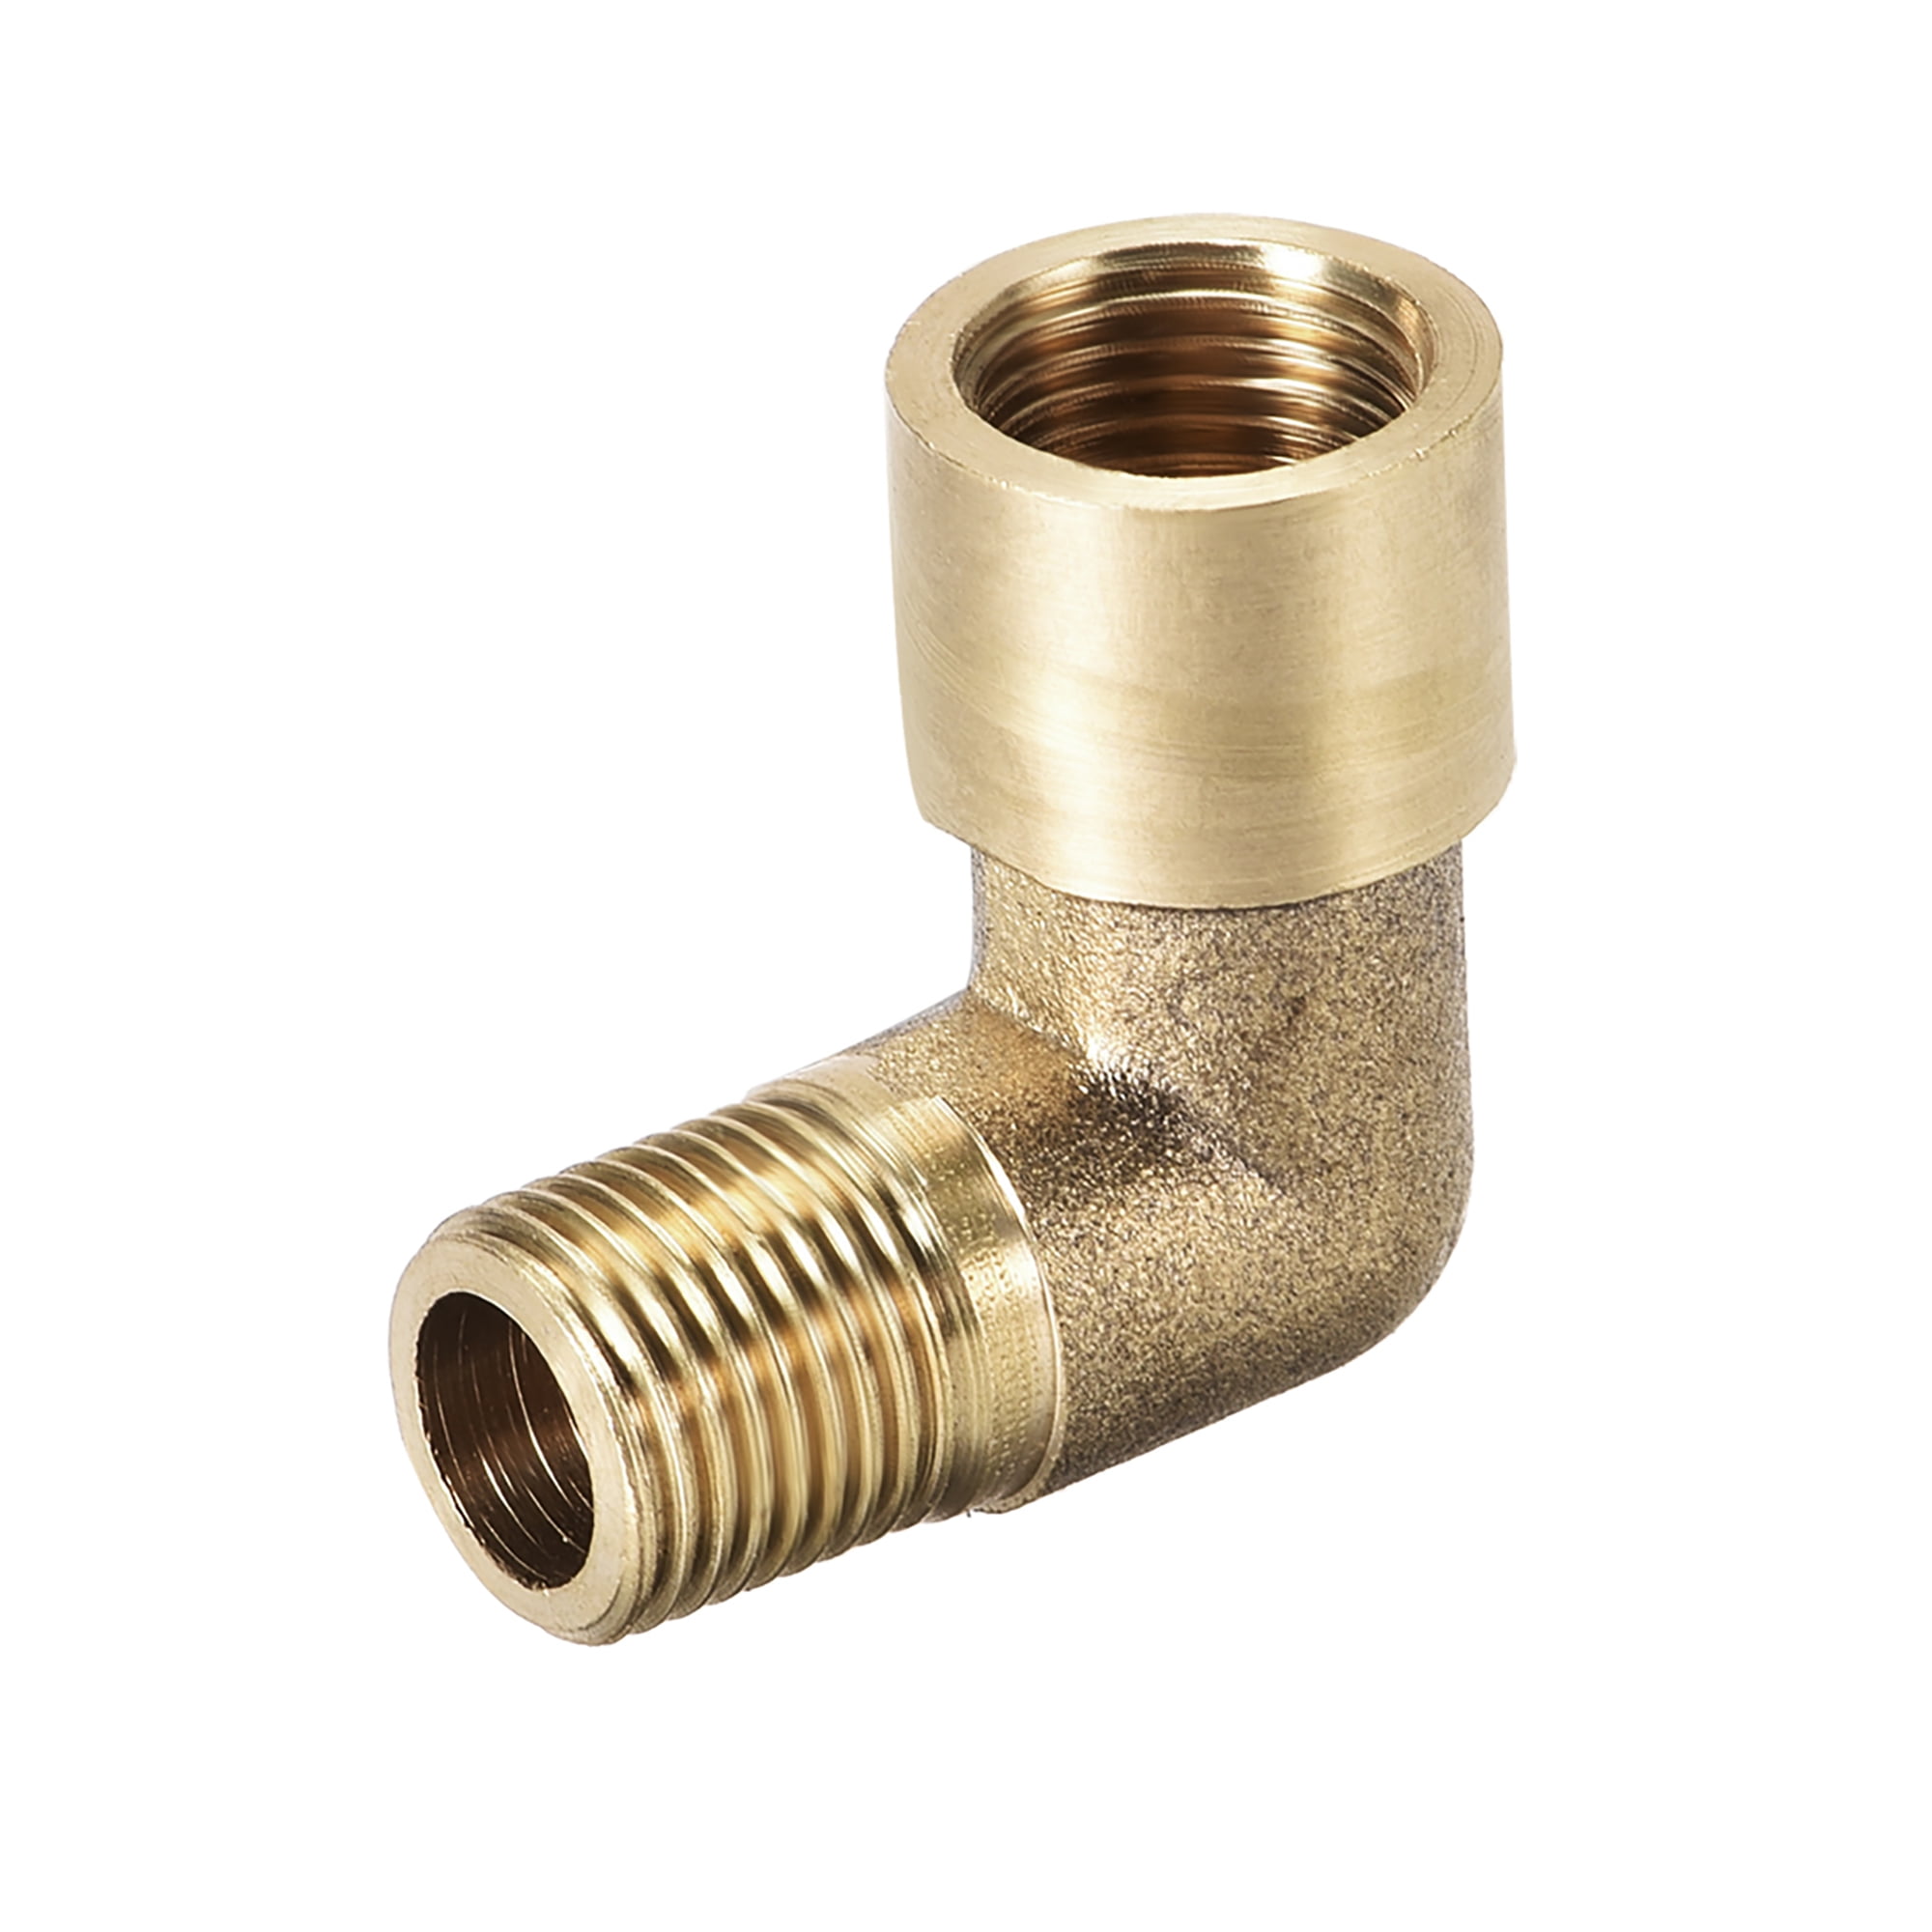 Brass Pipe Fitting 90 Degree Elbow 1 8 Pt Male X 1 8 Pt Female